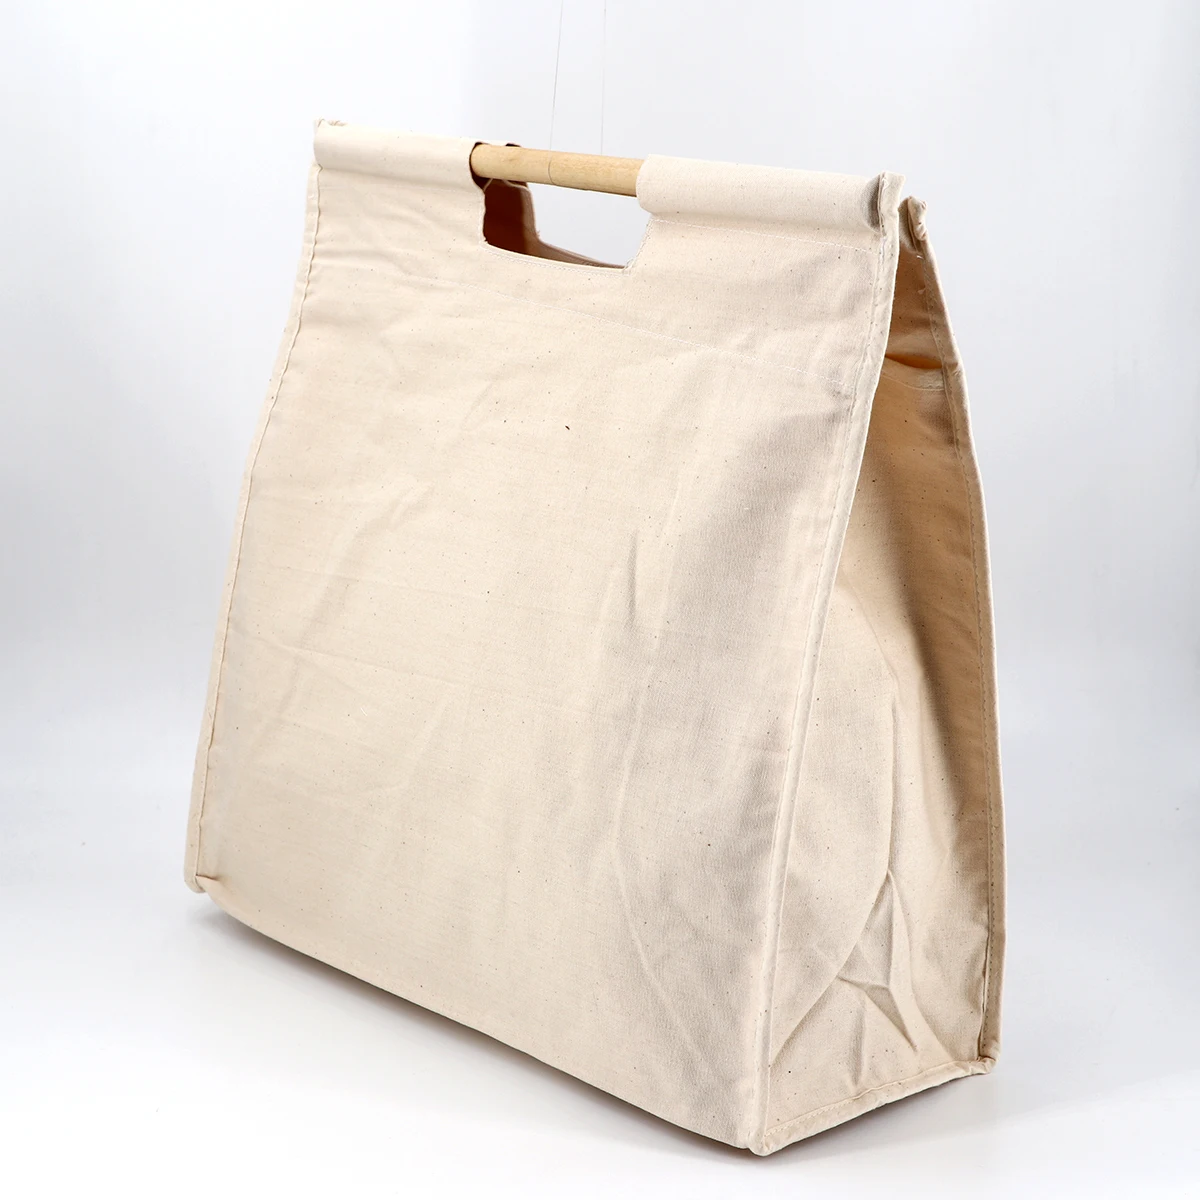 ZHIHUITL Cotton Canvas Tote,Hand Tote Shopping Bags, Eco Friendly  Shoppers,A pack of 3 natural cotton shopping tote bags of different  sizes,Natural